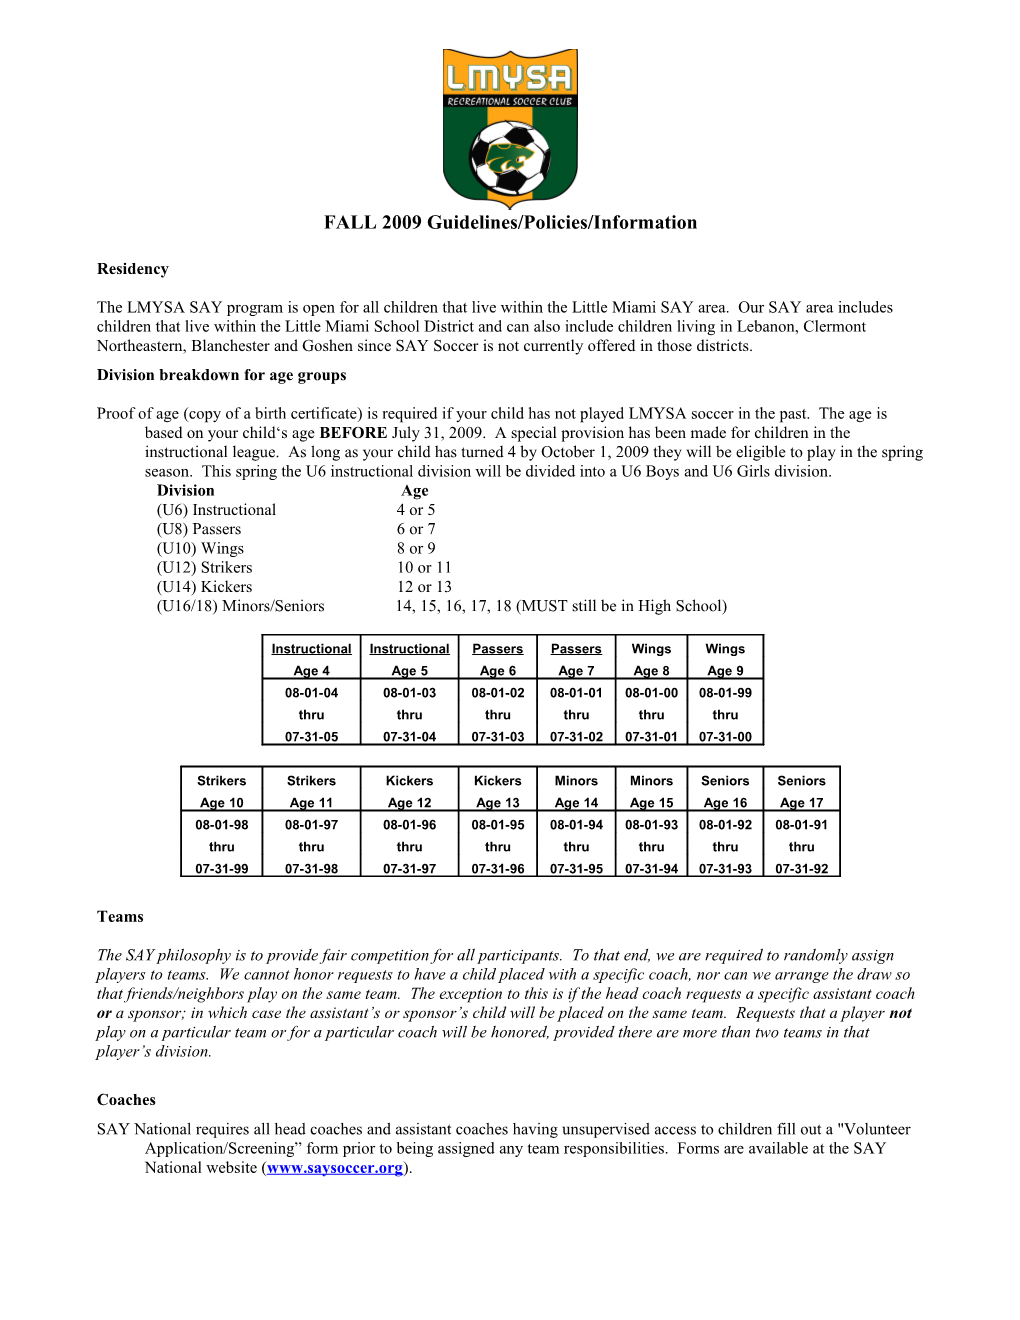 FALL 2009 Guidelines/Policies/Information